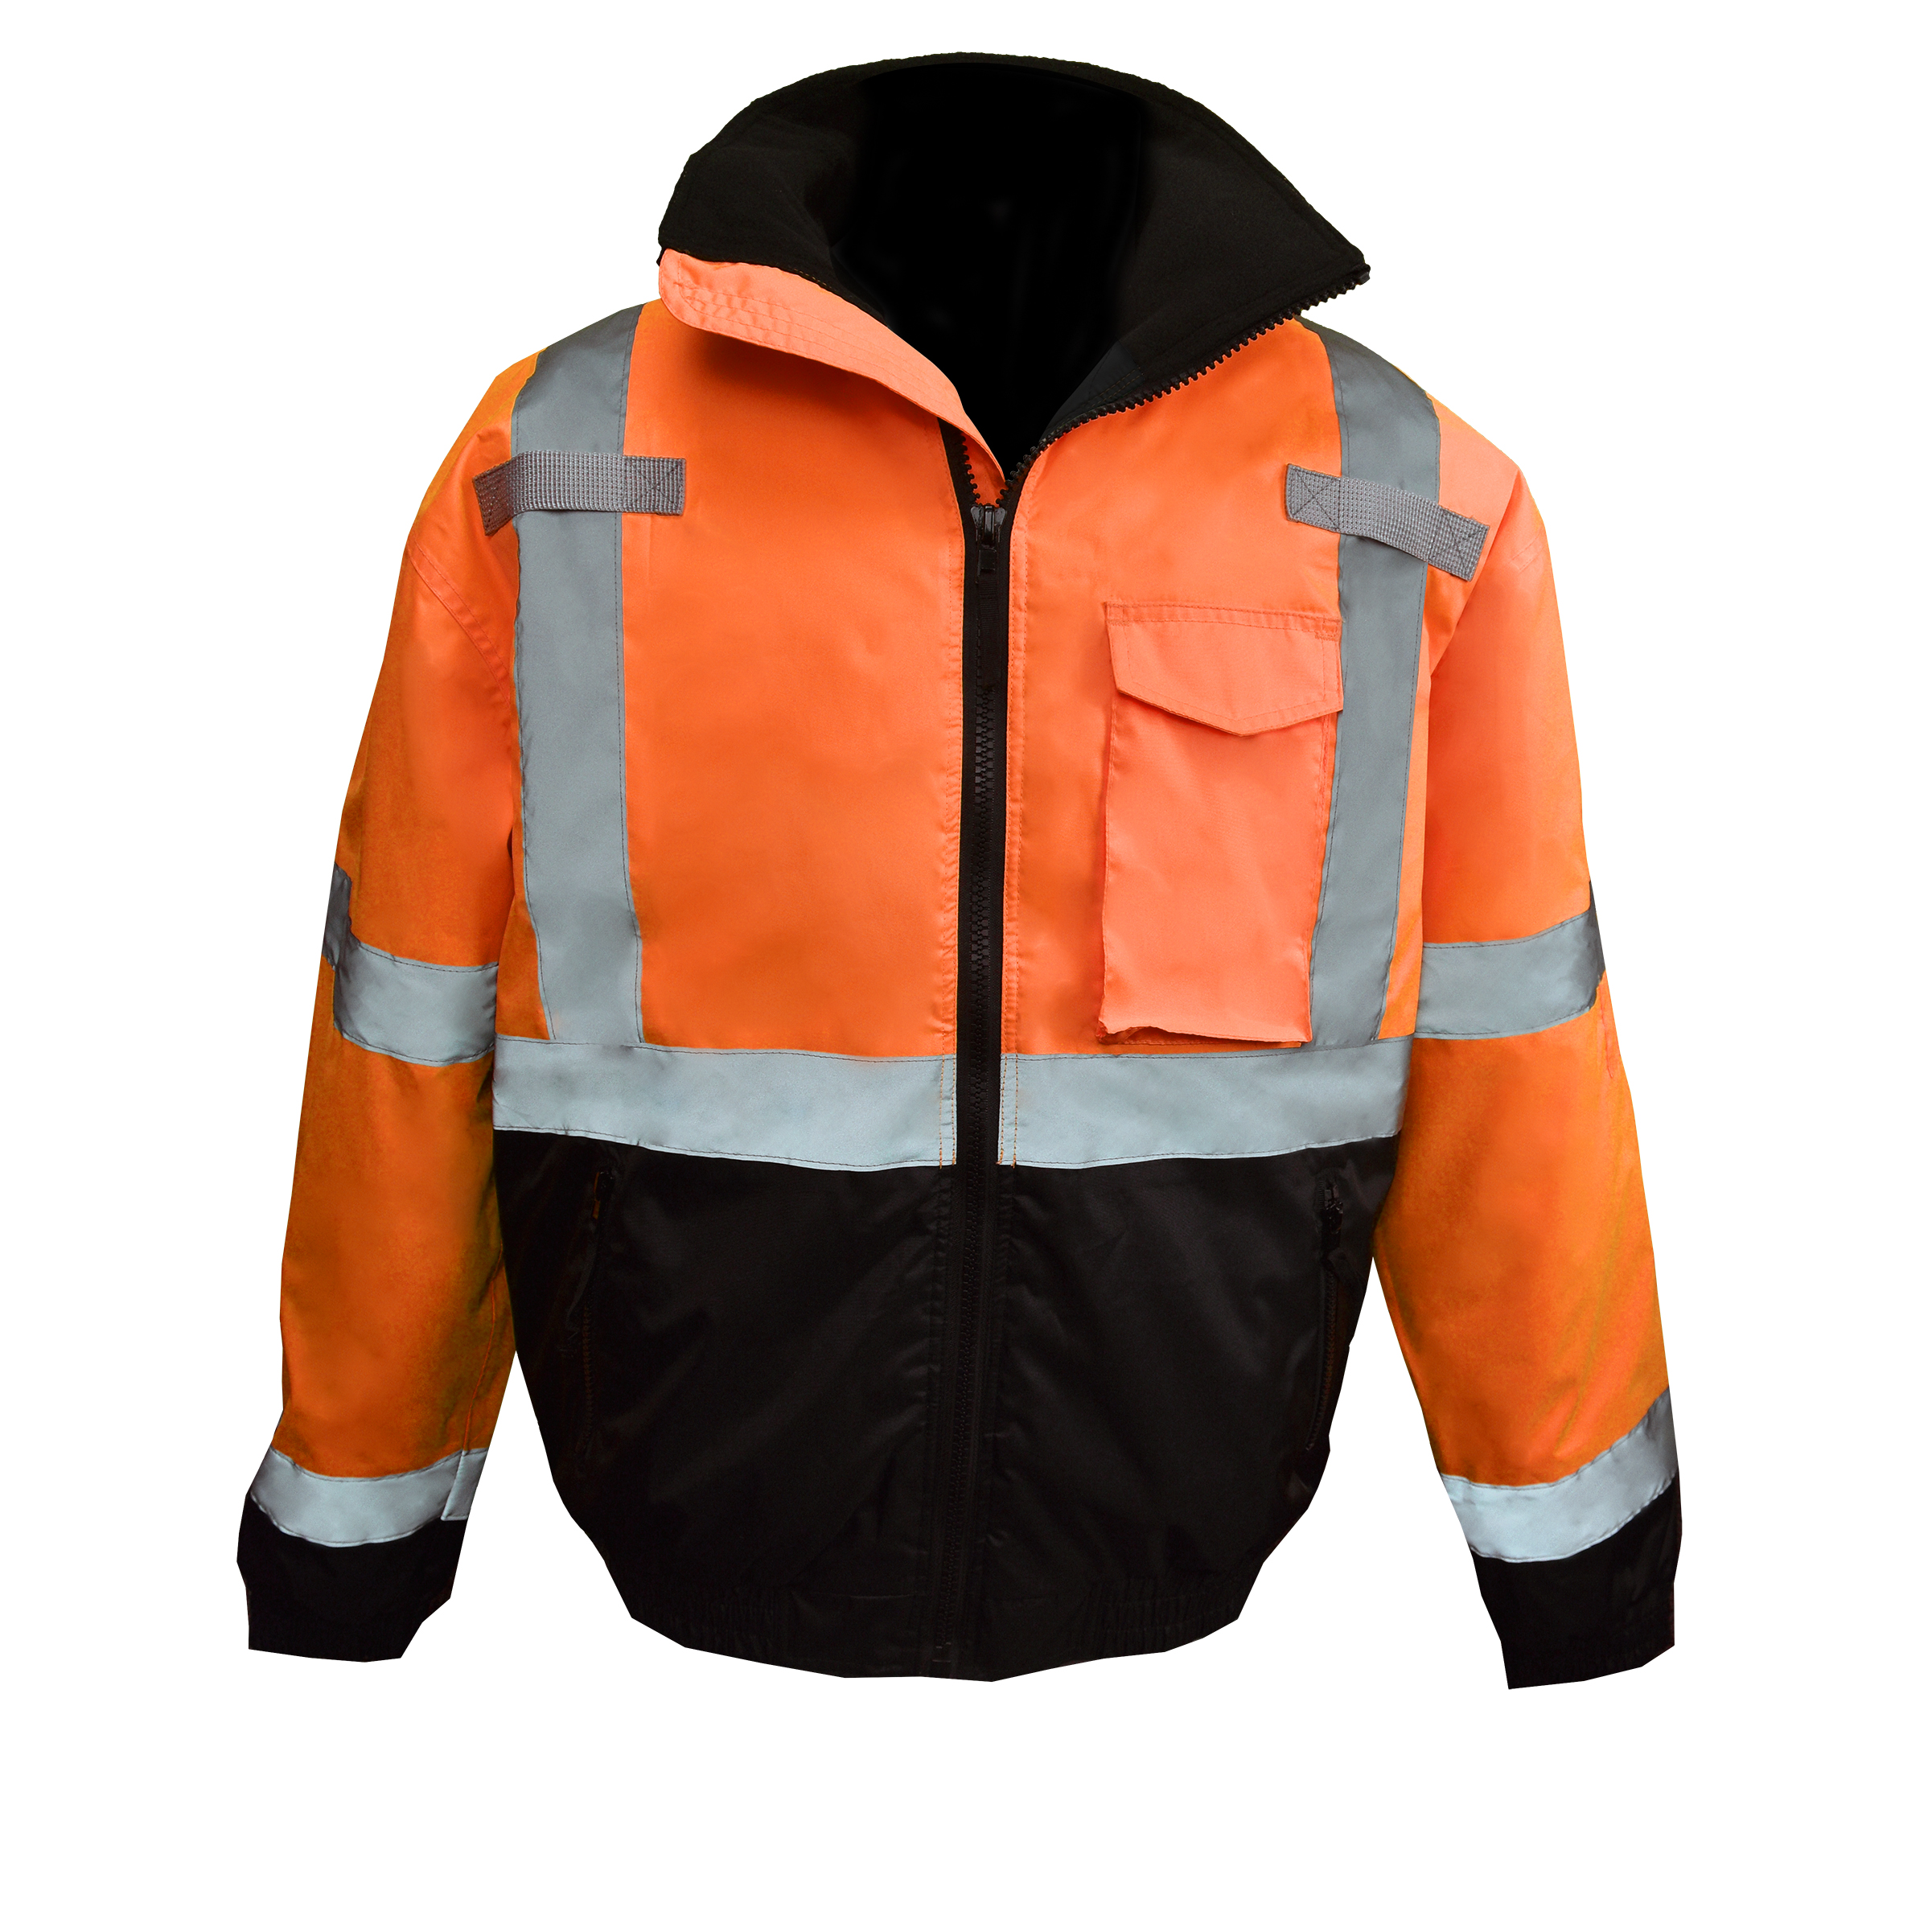 SJ11QB Class3 High Visibility Weatherproof Bomber Jacket with Quilted Built-in Liner - Orange - Size 2X